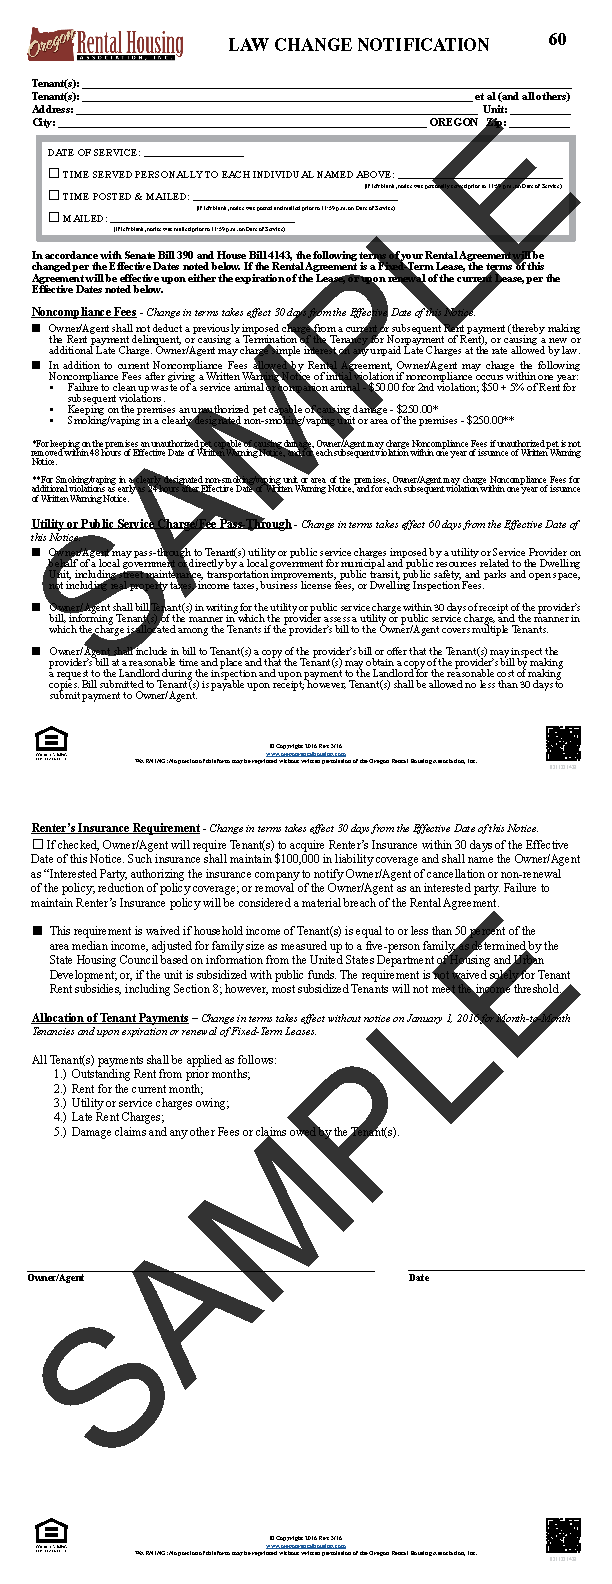 Sample Letter To Tenant For Damages from store.oregonrentalhousing.com